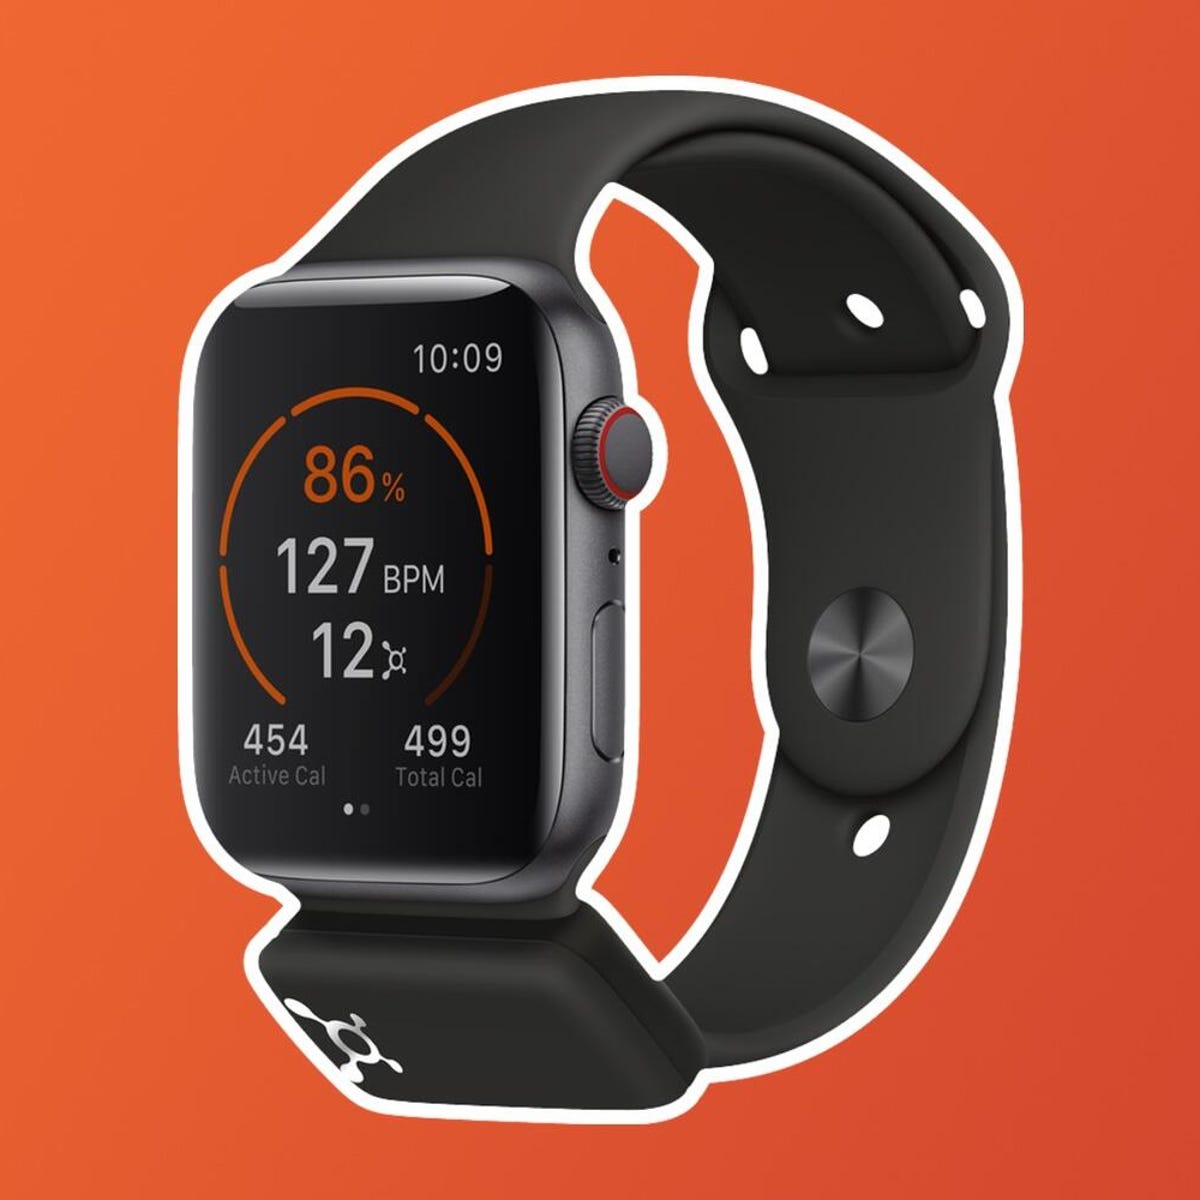 Orangetheory launches fitness tracker that connects to your Apple